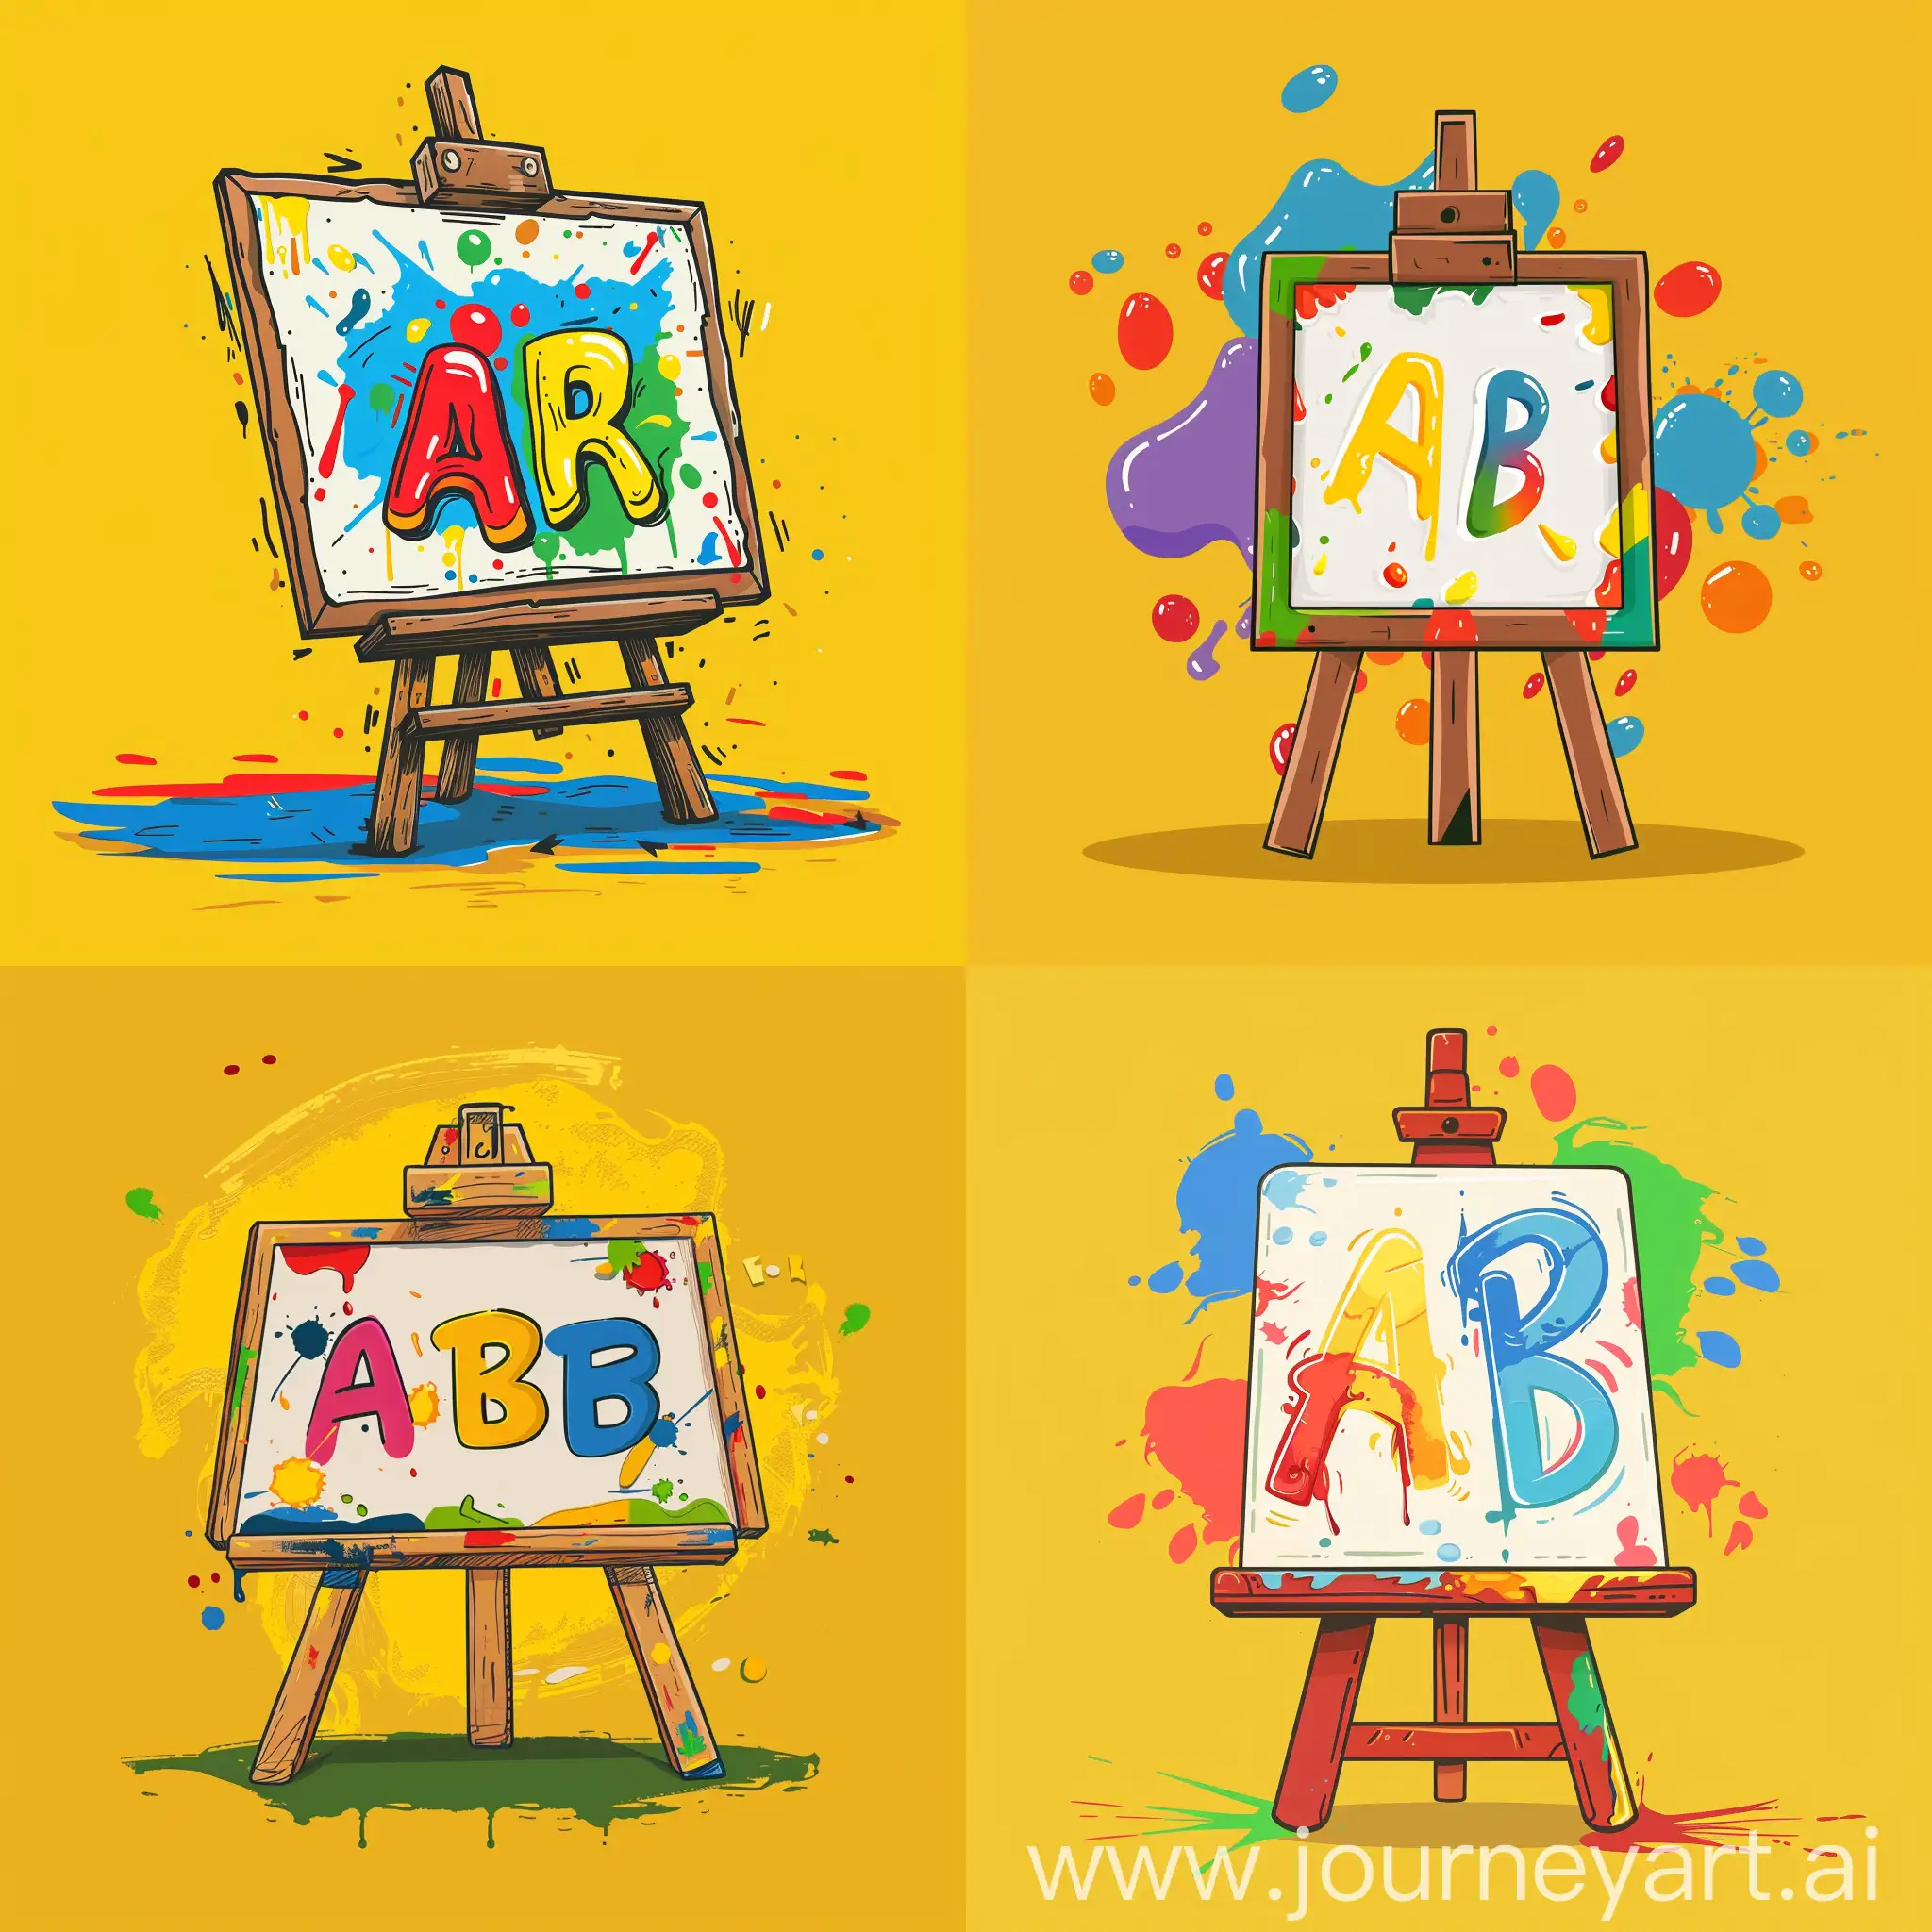 Colorful-ABC-Letters-on-Canvas-in-Cartoon-Style-on-Yellow-Background